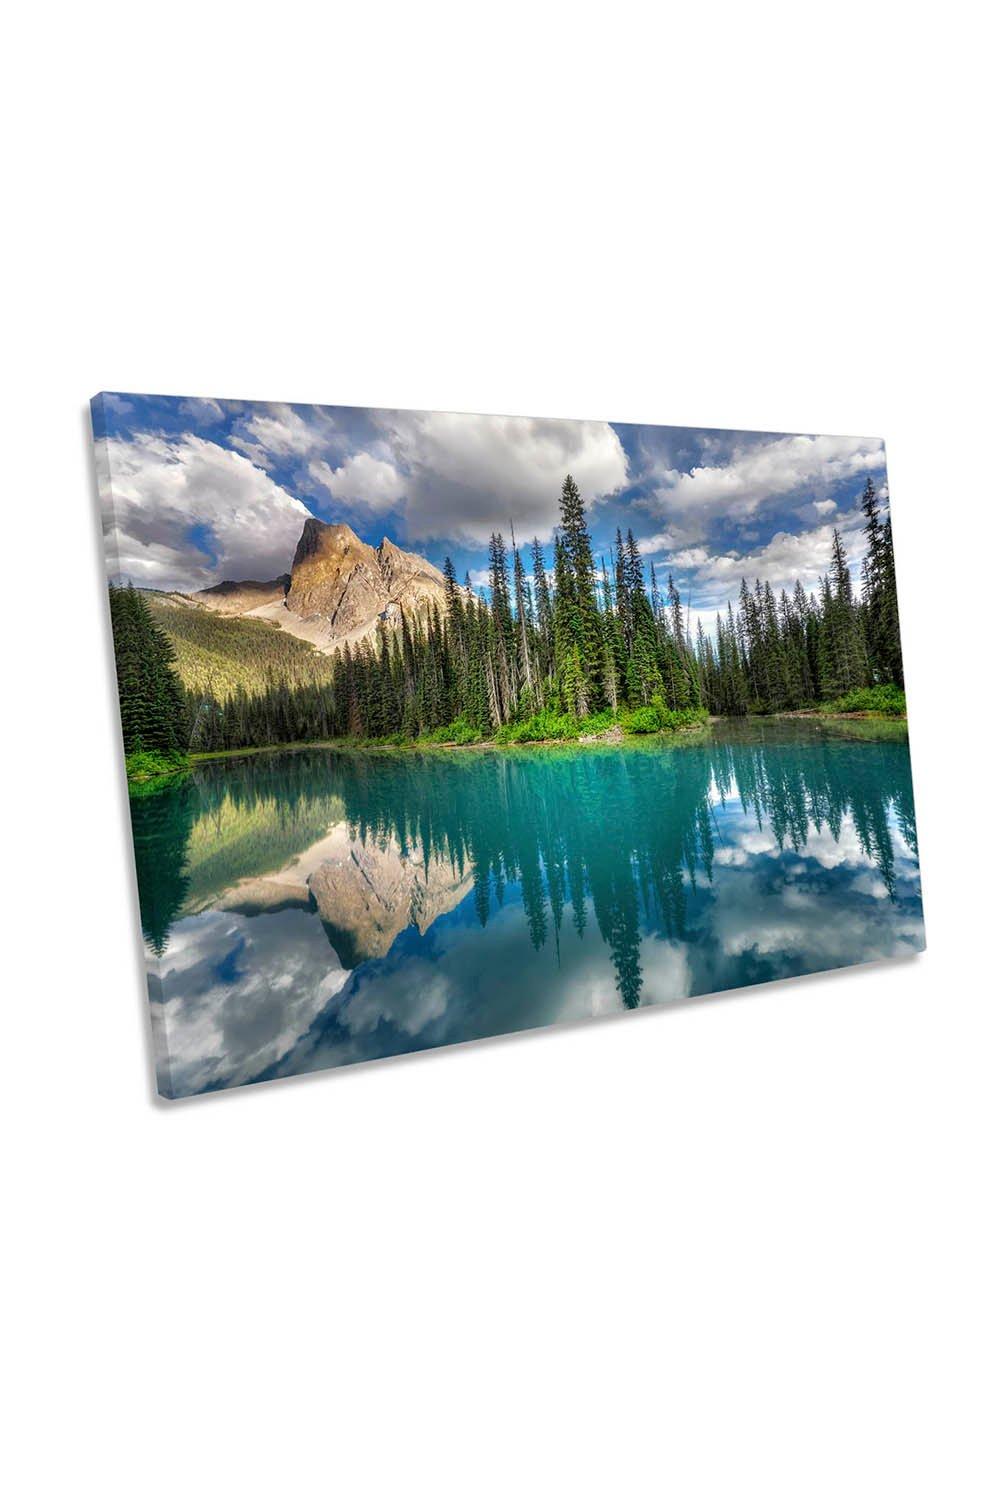 Emerald Mountain Lakes Landscape Canvas Wall Art Picture Print